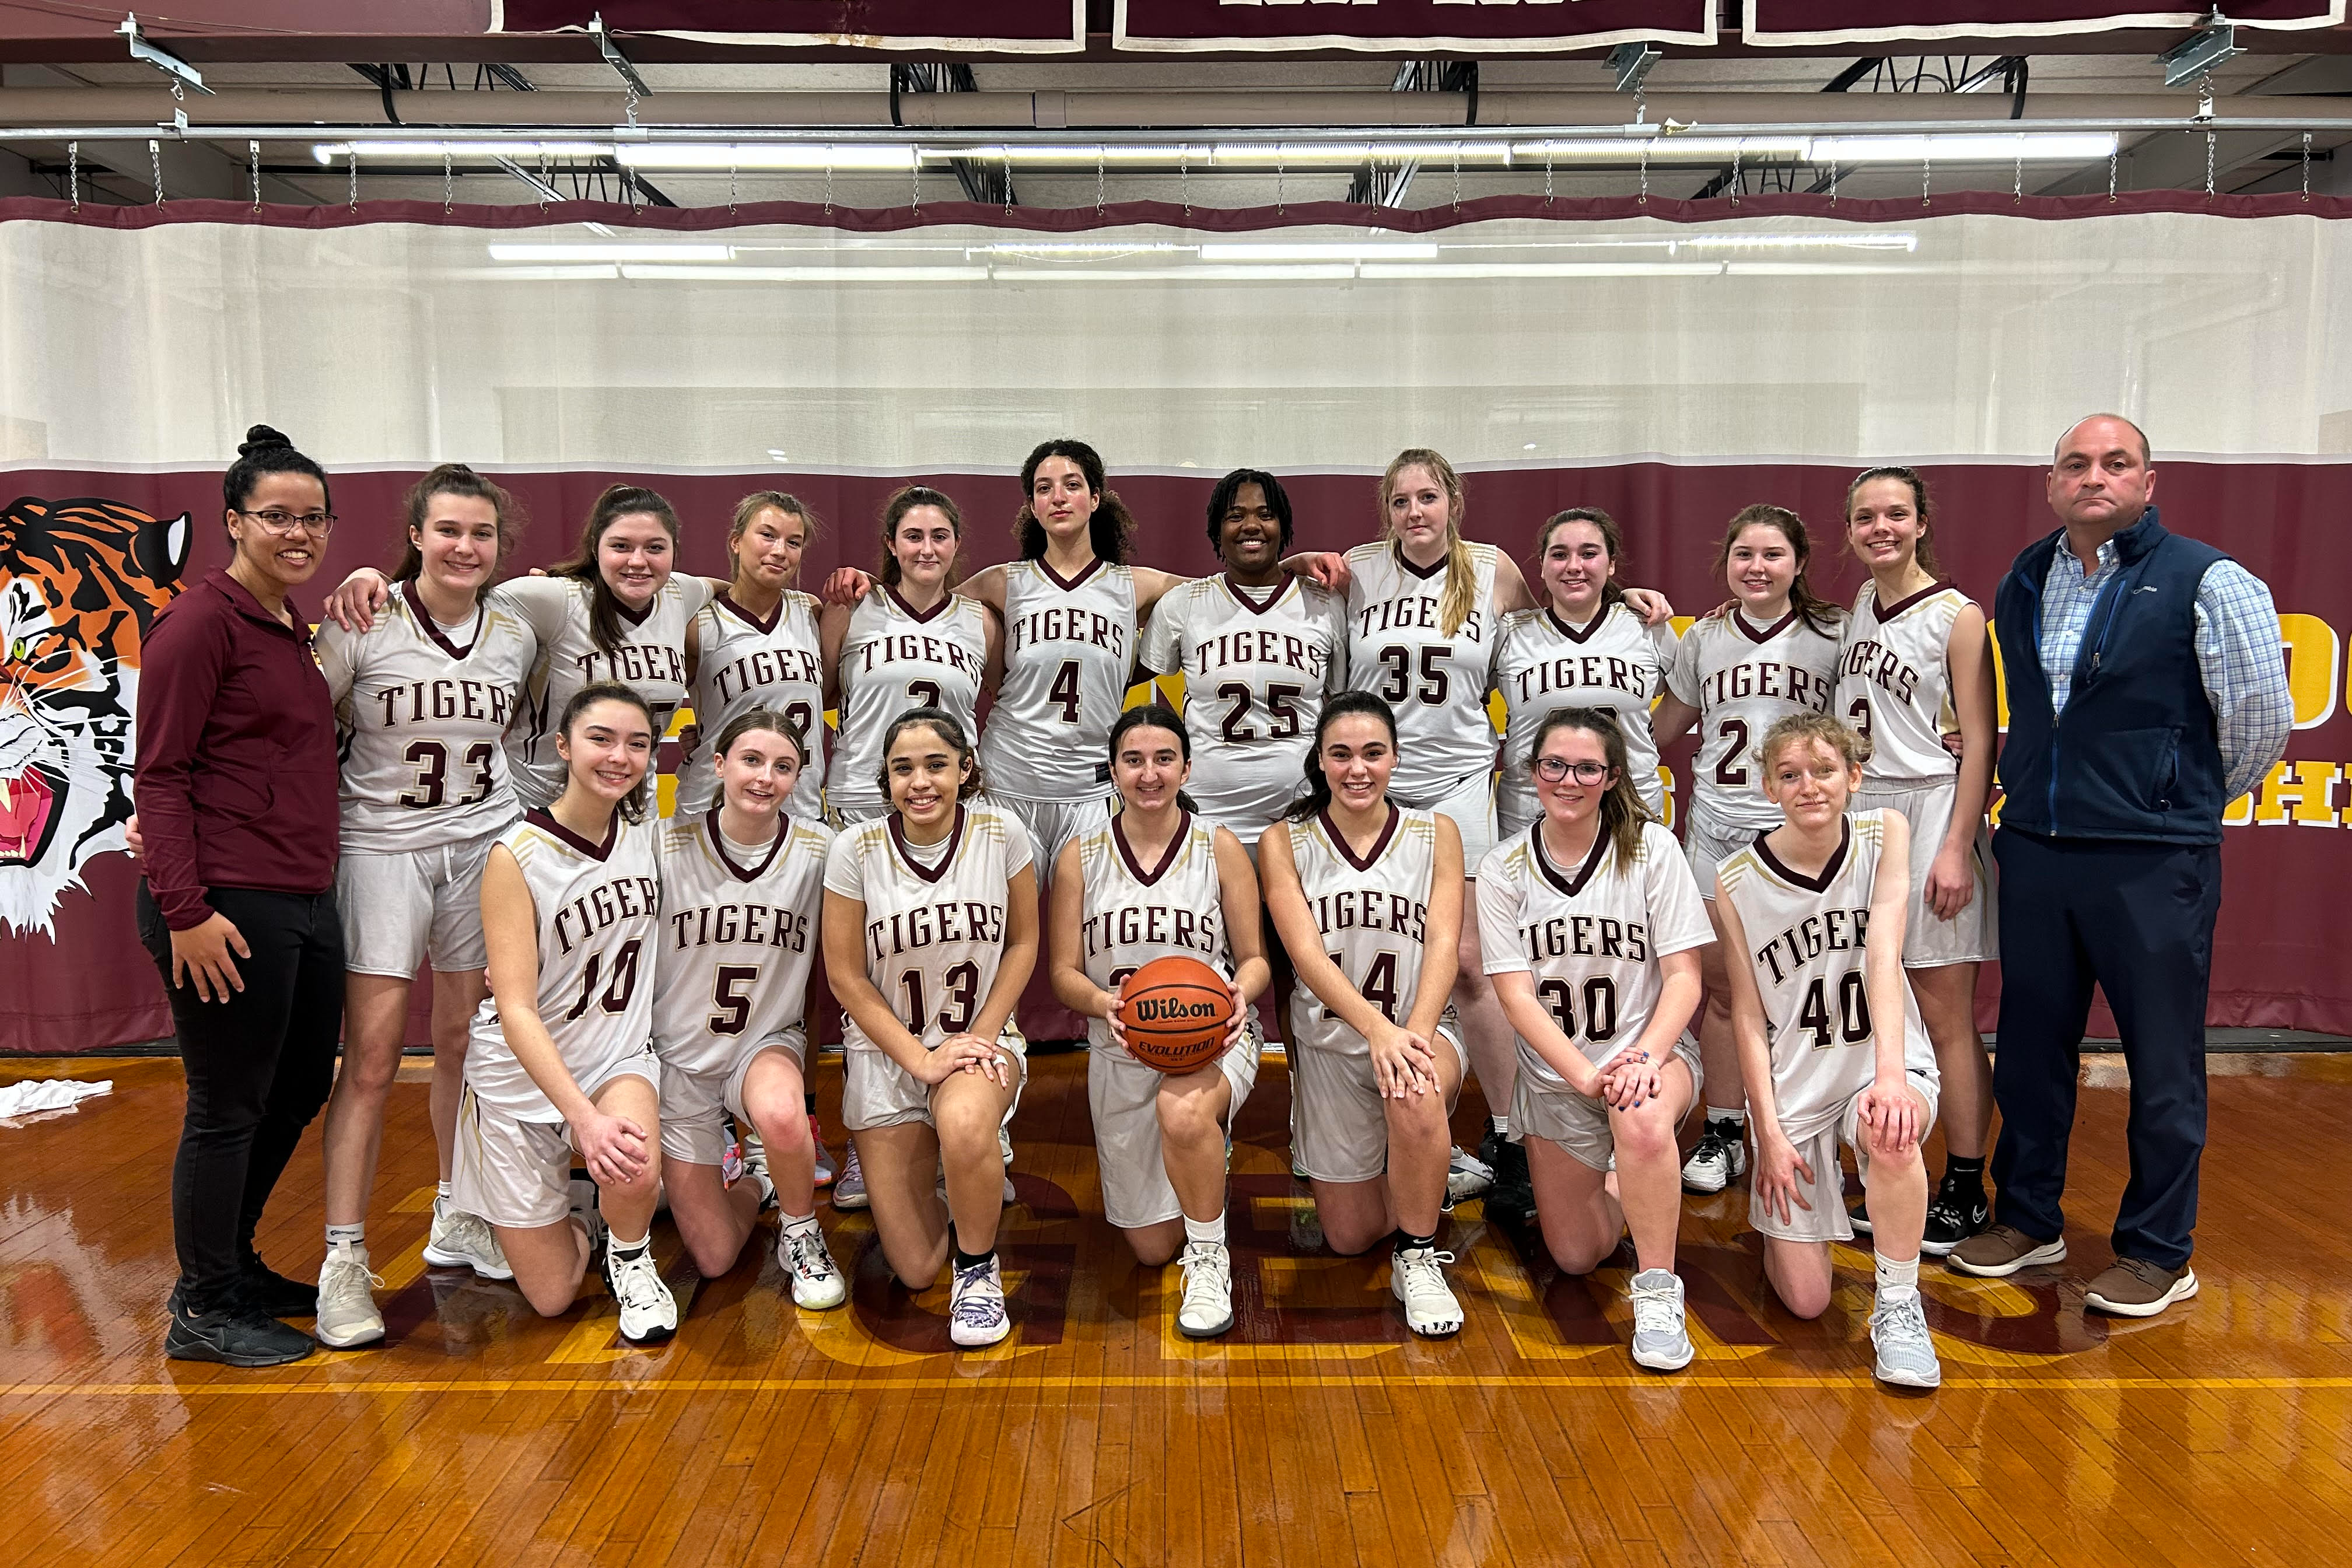 Team photo of girls team and coaches